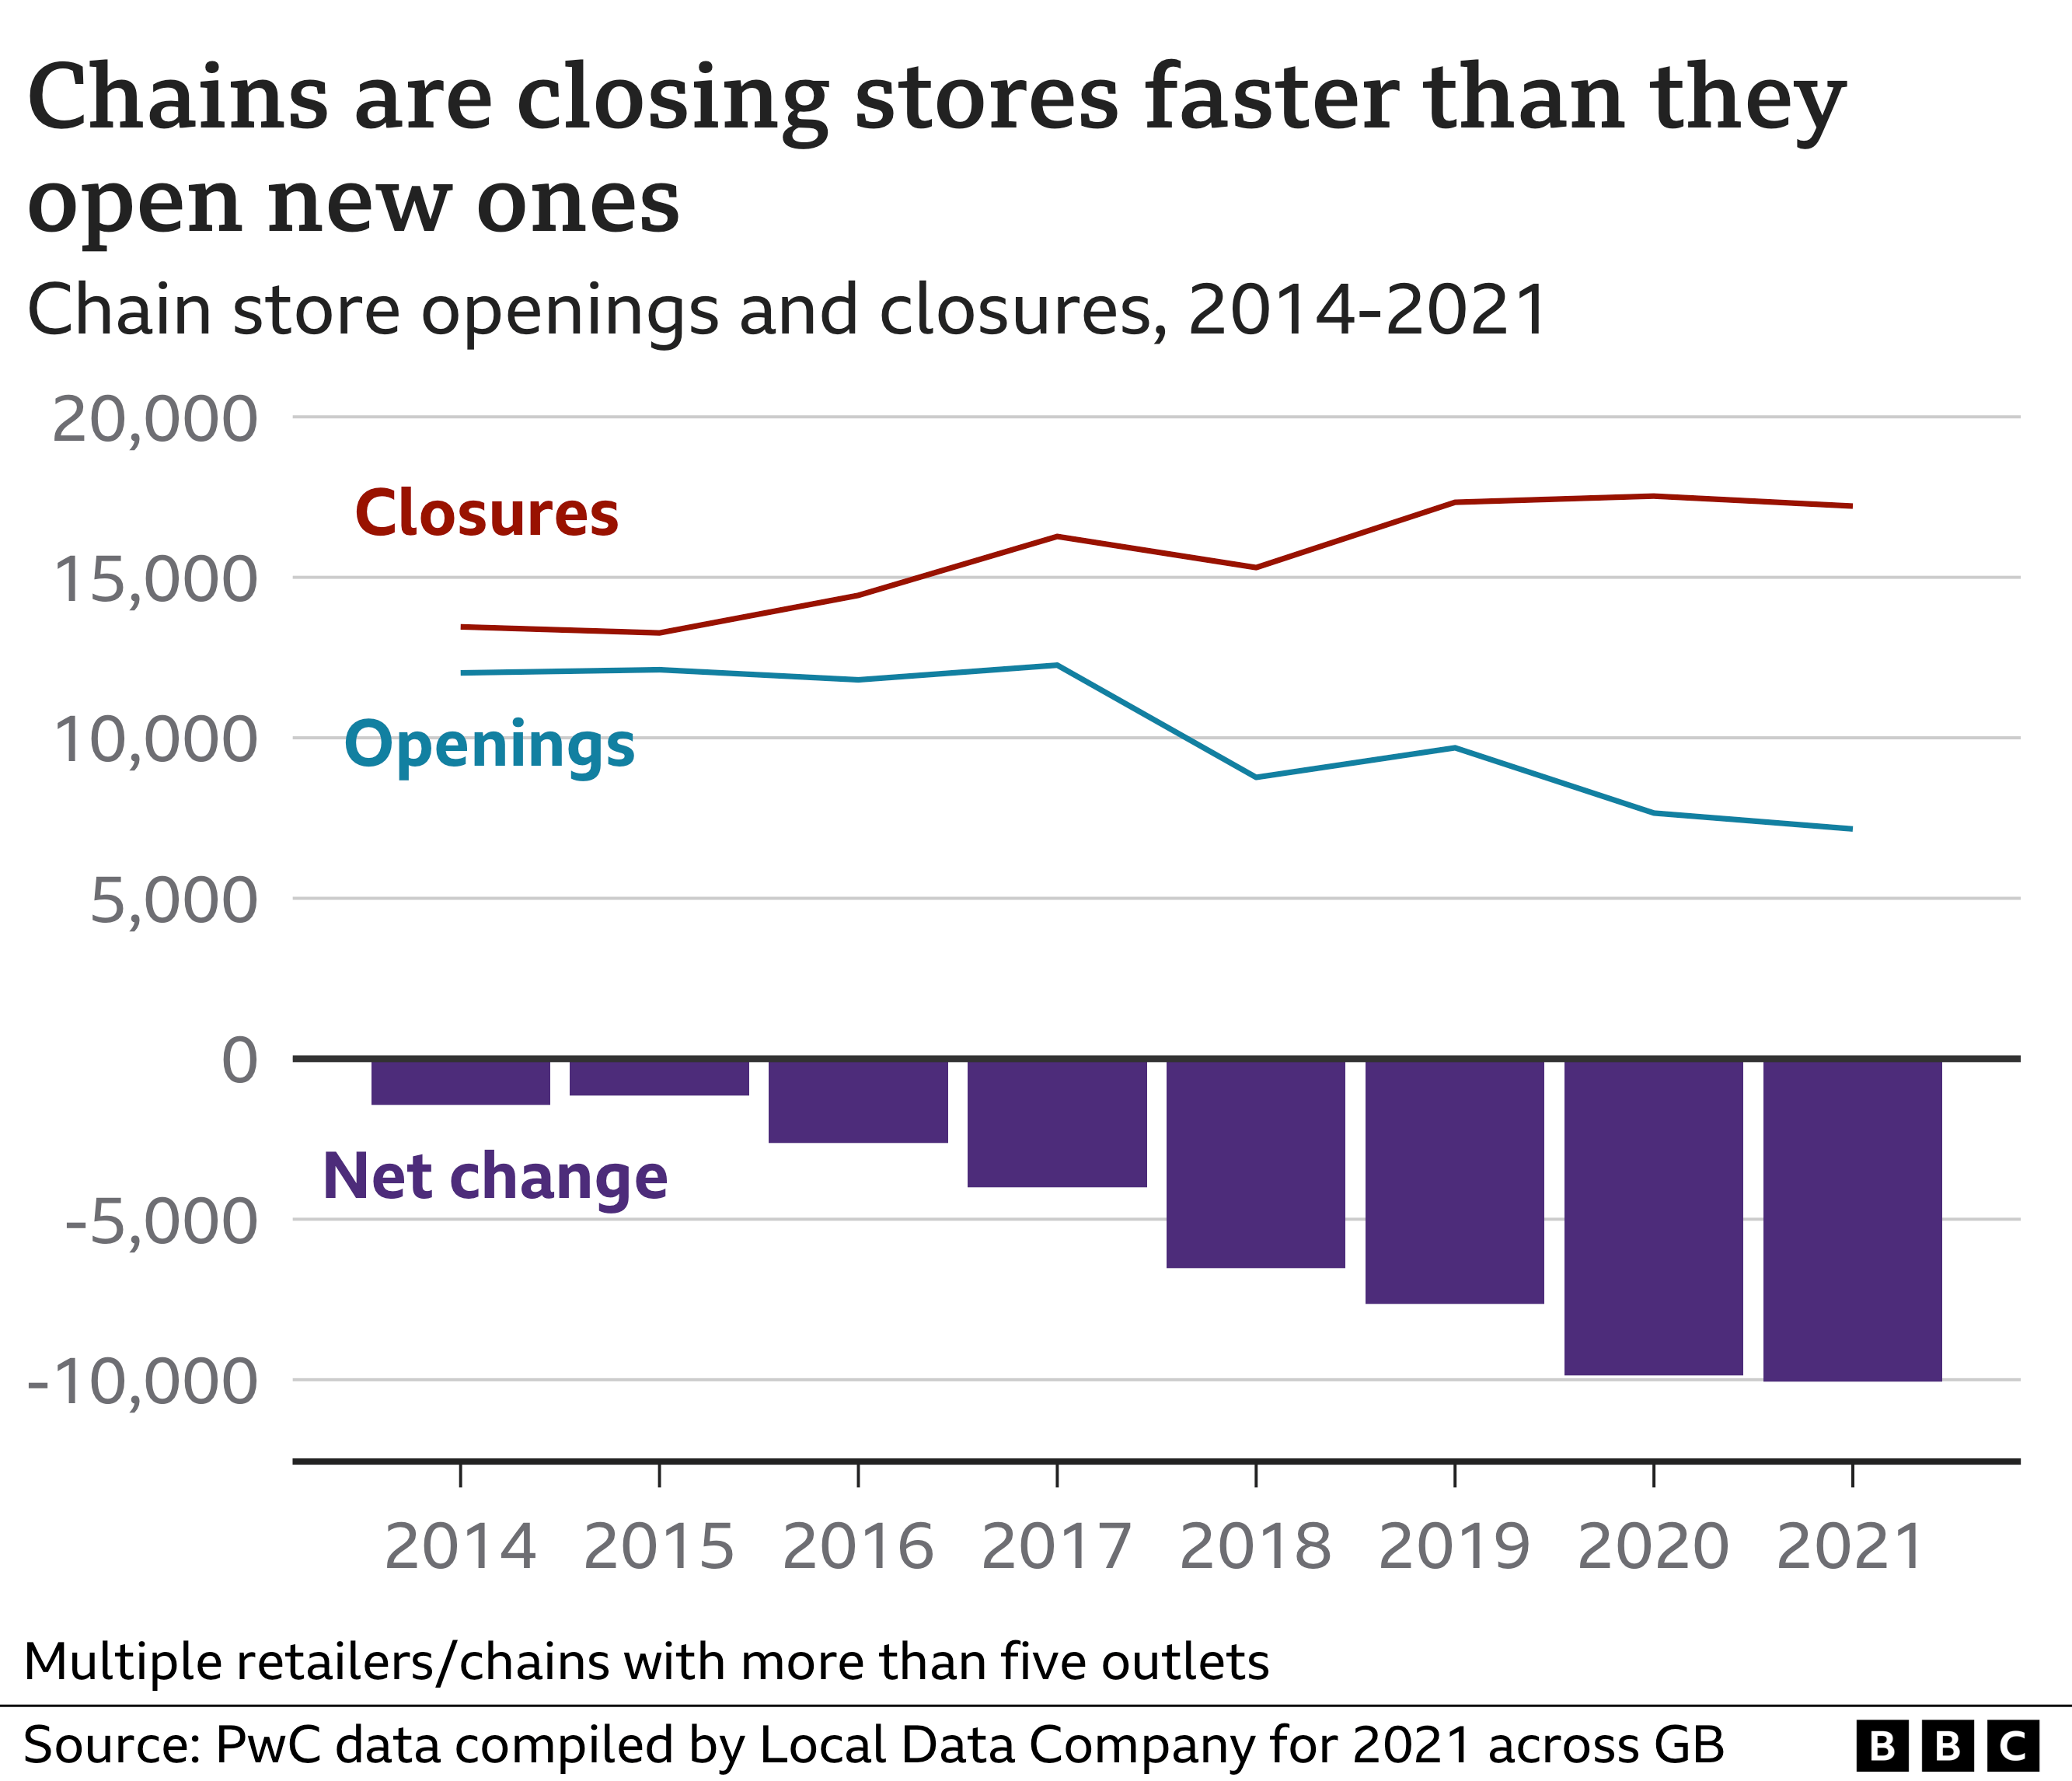 More than 17,000 chain store shops closed last year BBC News